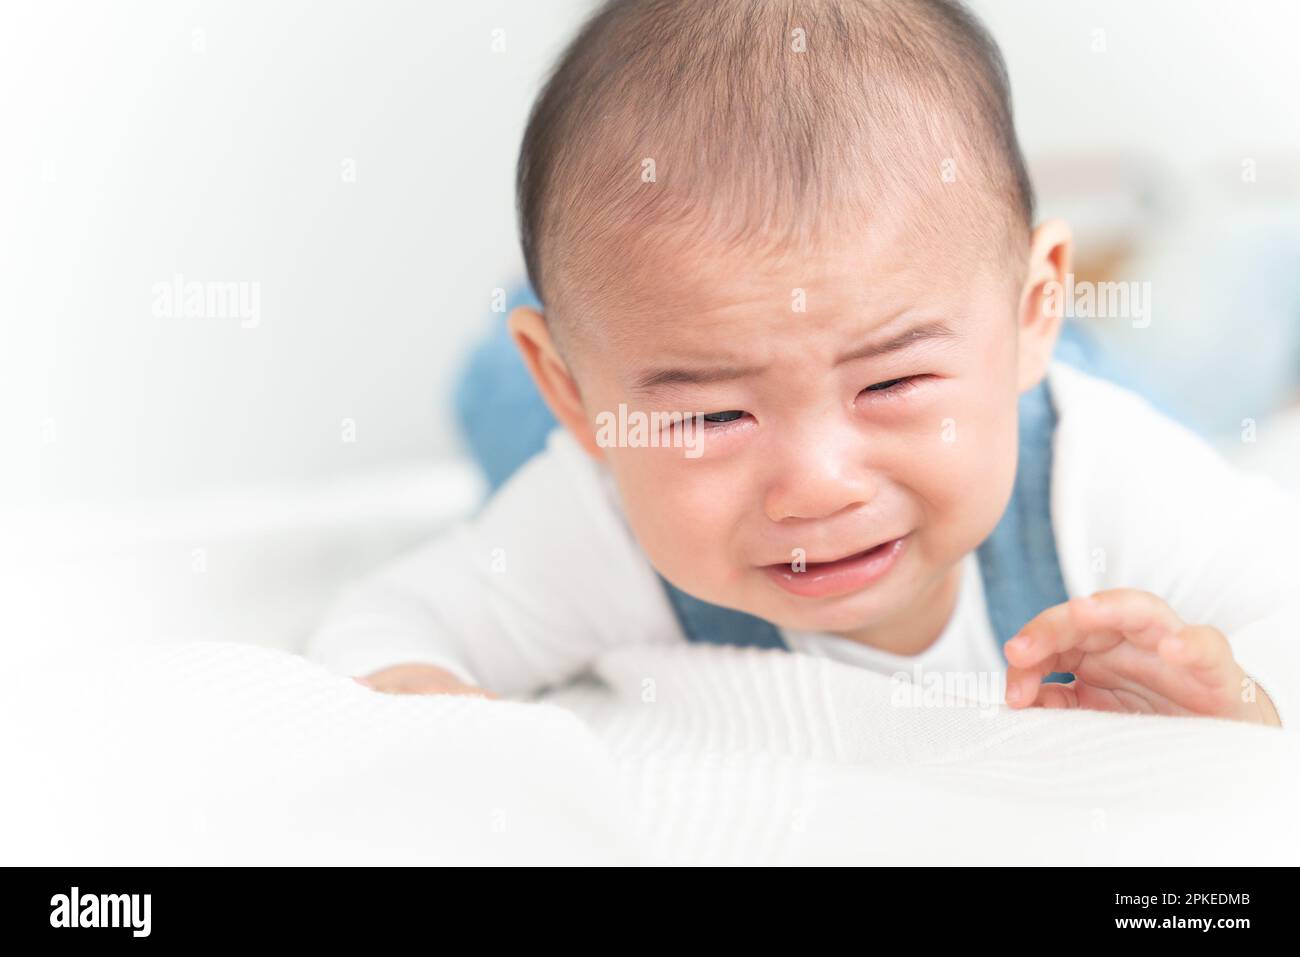 Baby crying on belly Stock Photo